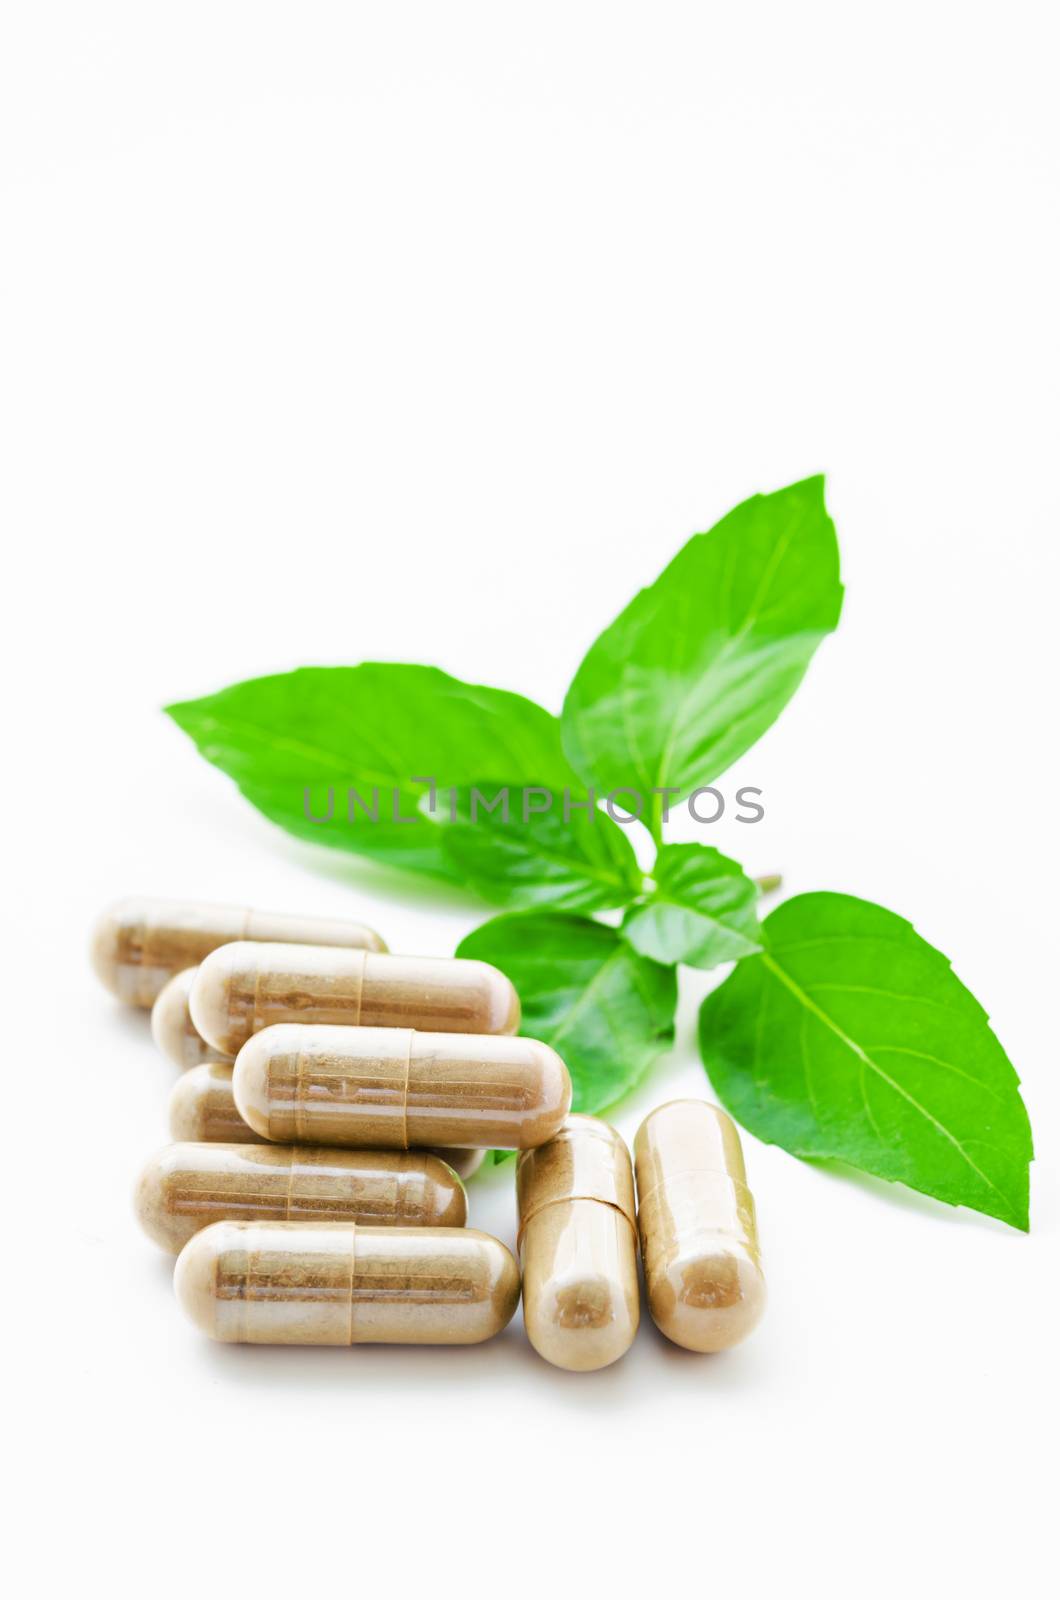 Herbal medicine in capsules with herb on white background, healthy lifestyle concept.